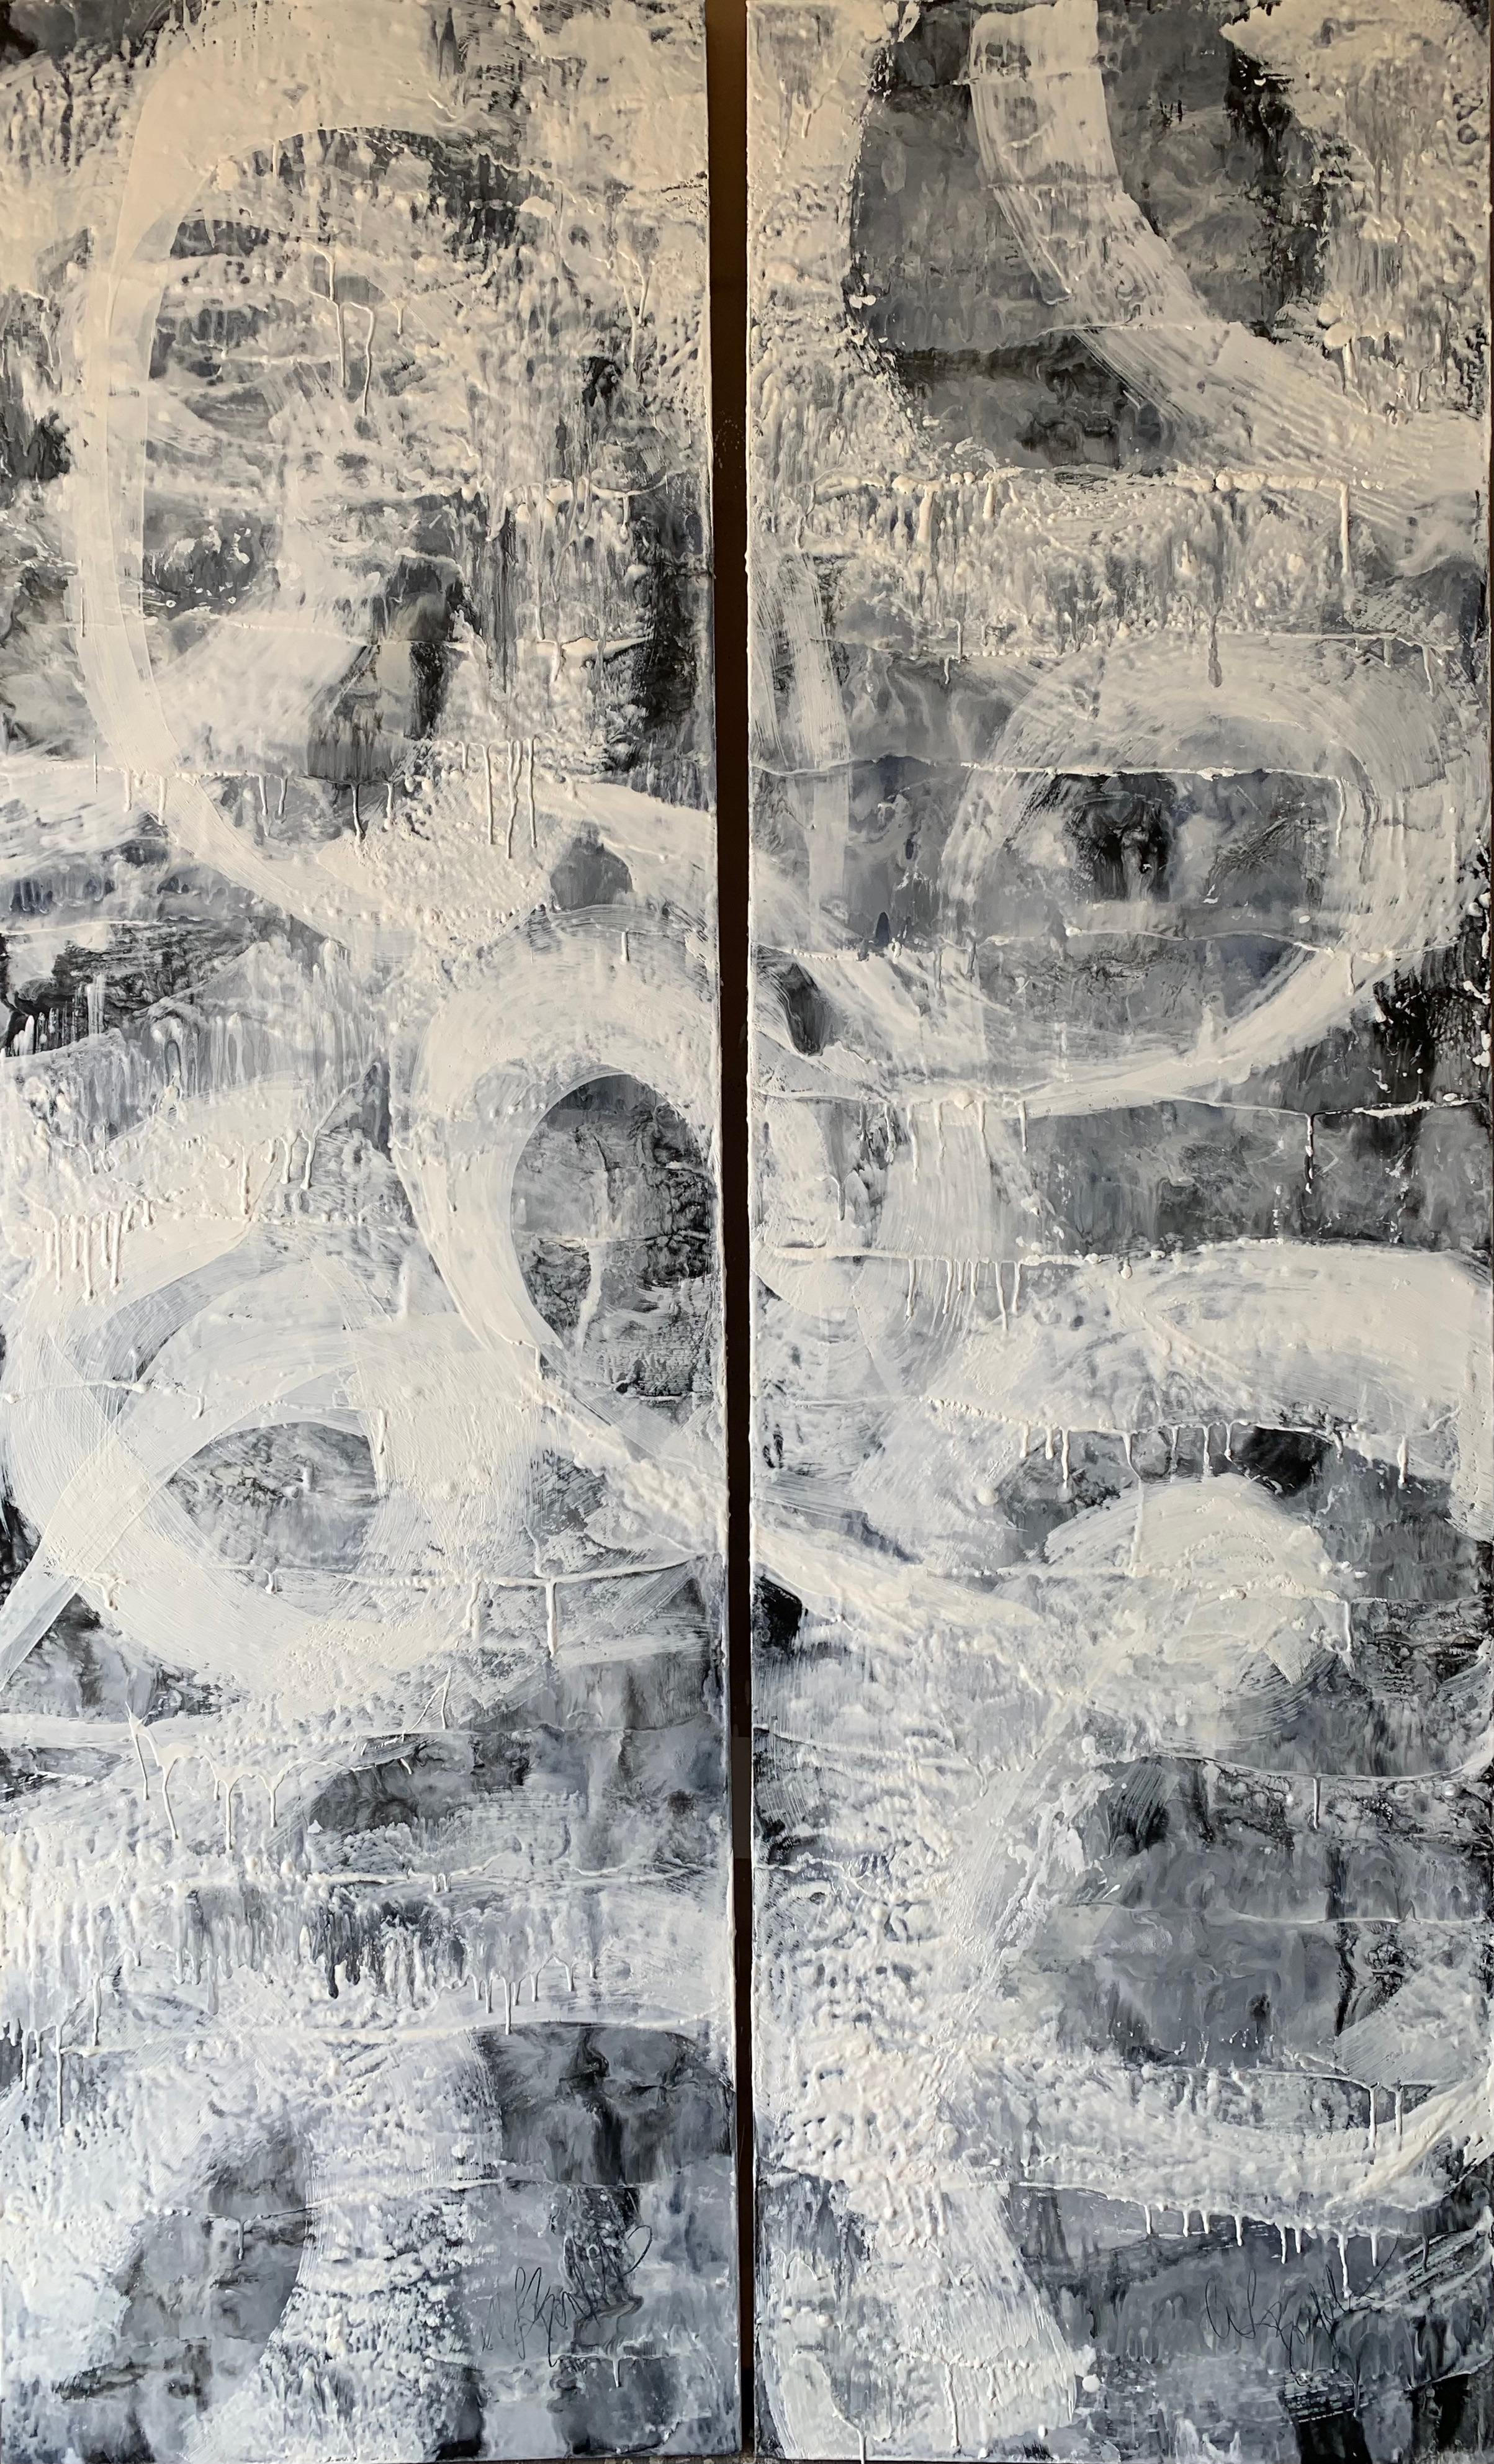 Encaustic and oil with acrylic frame

24x79.5 each, $6500 each (2 panels)

This Painting will be shipped directly from the artist's studio.